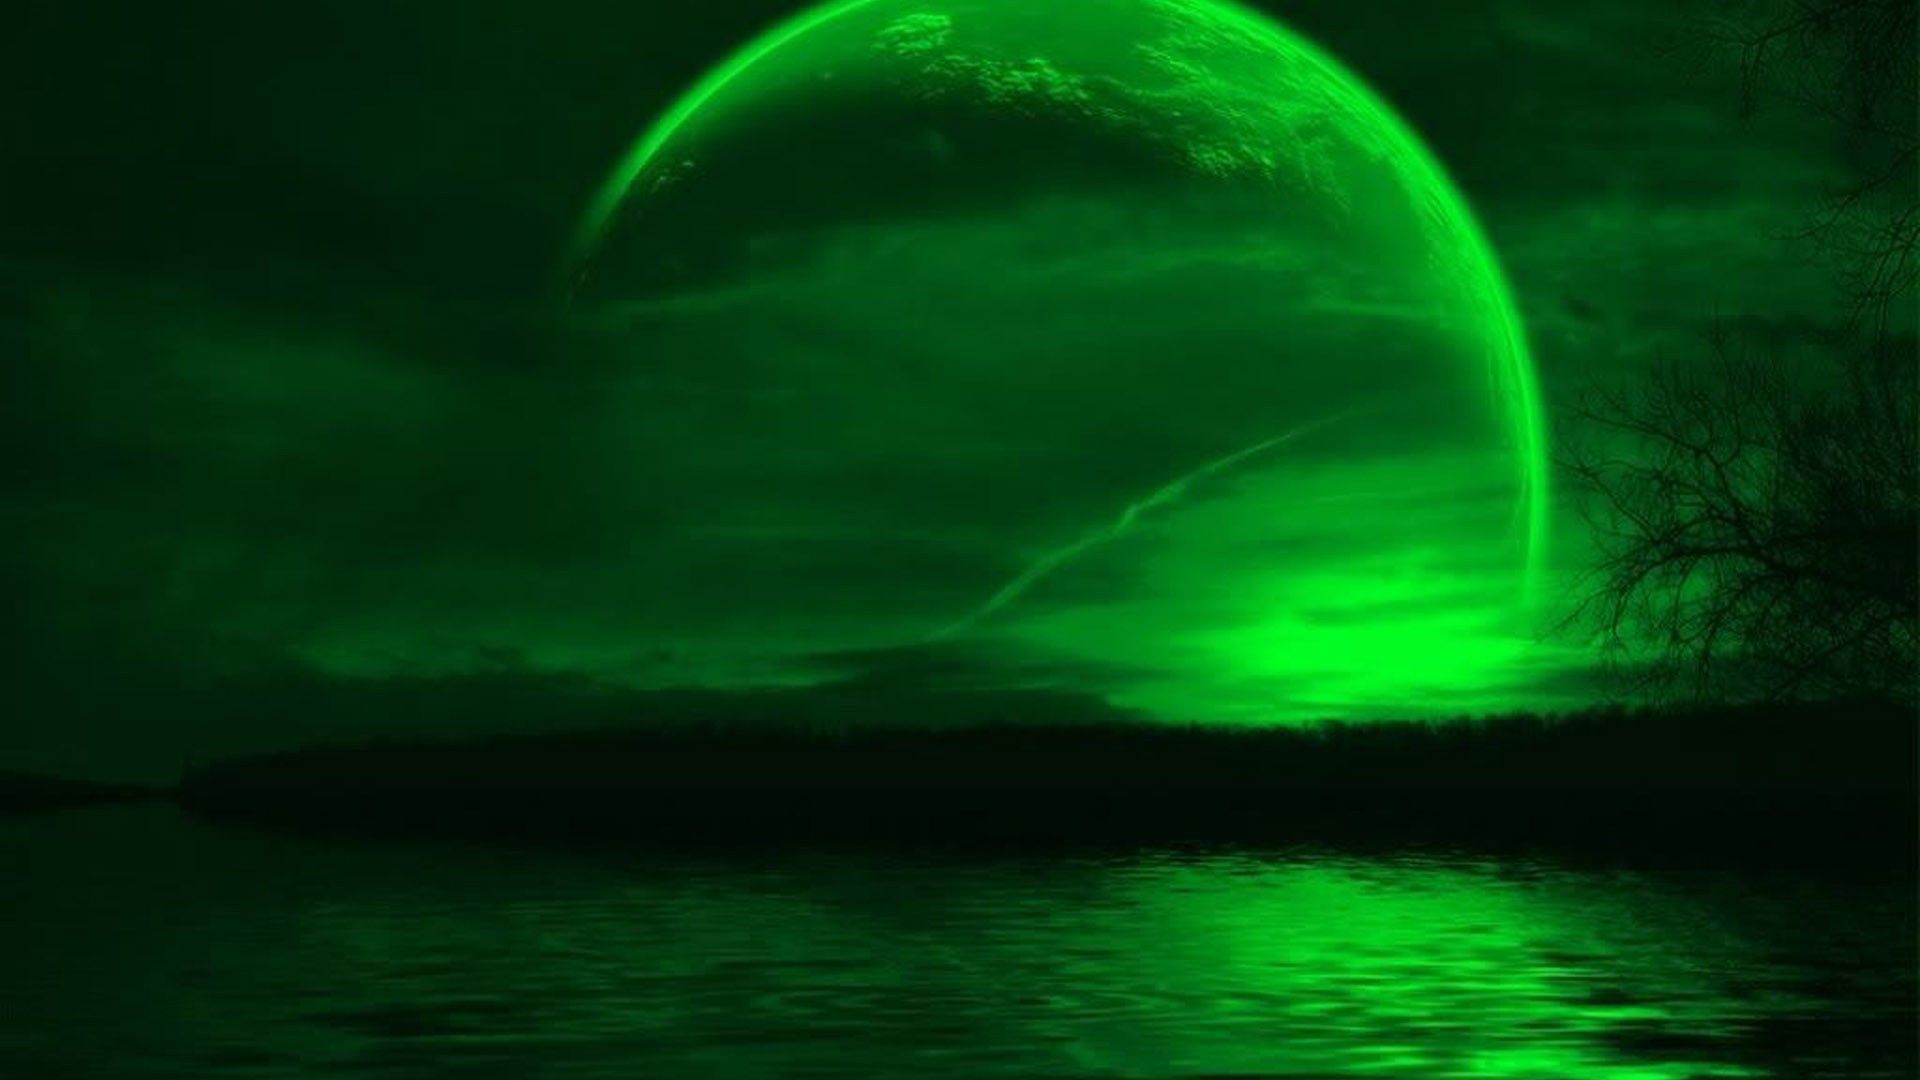 Green Moon Sky Background Reflection On Water HD Green Aesthetic Wallpaper